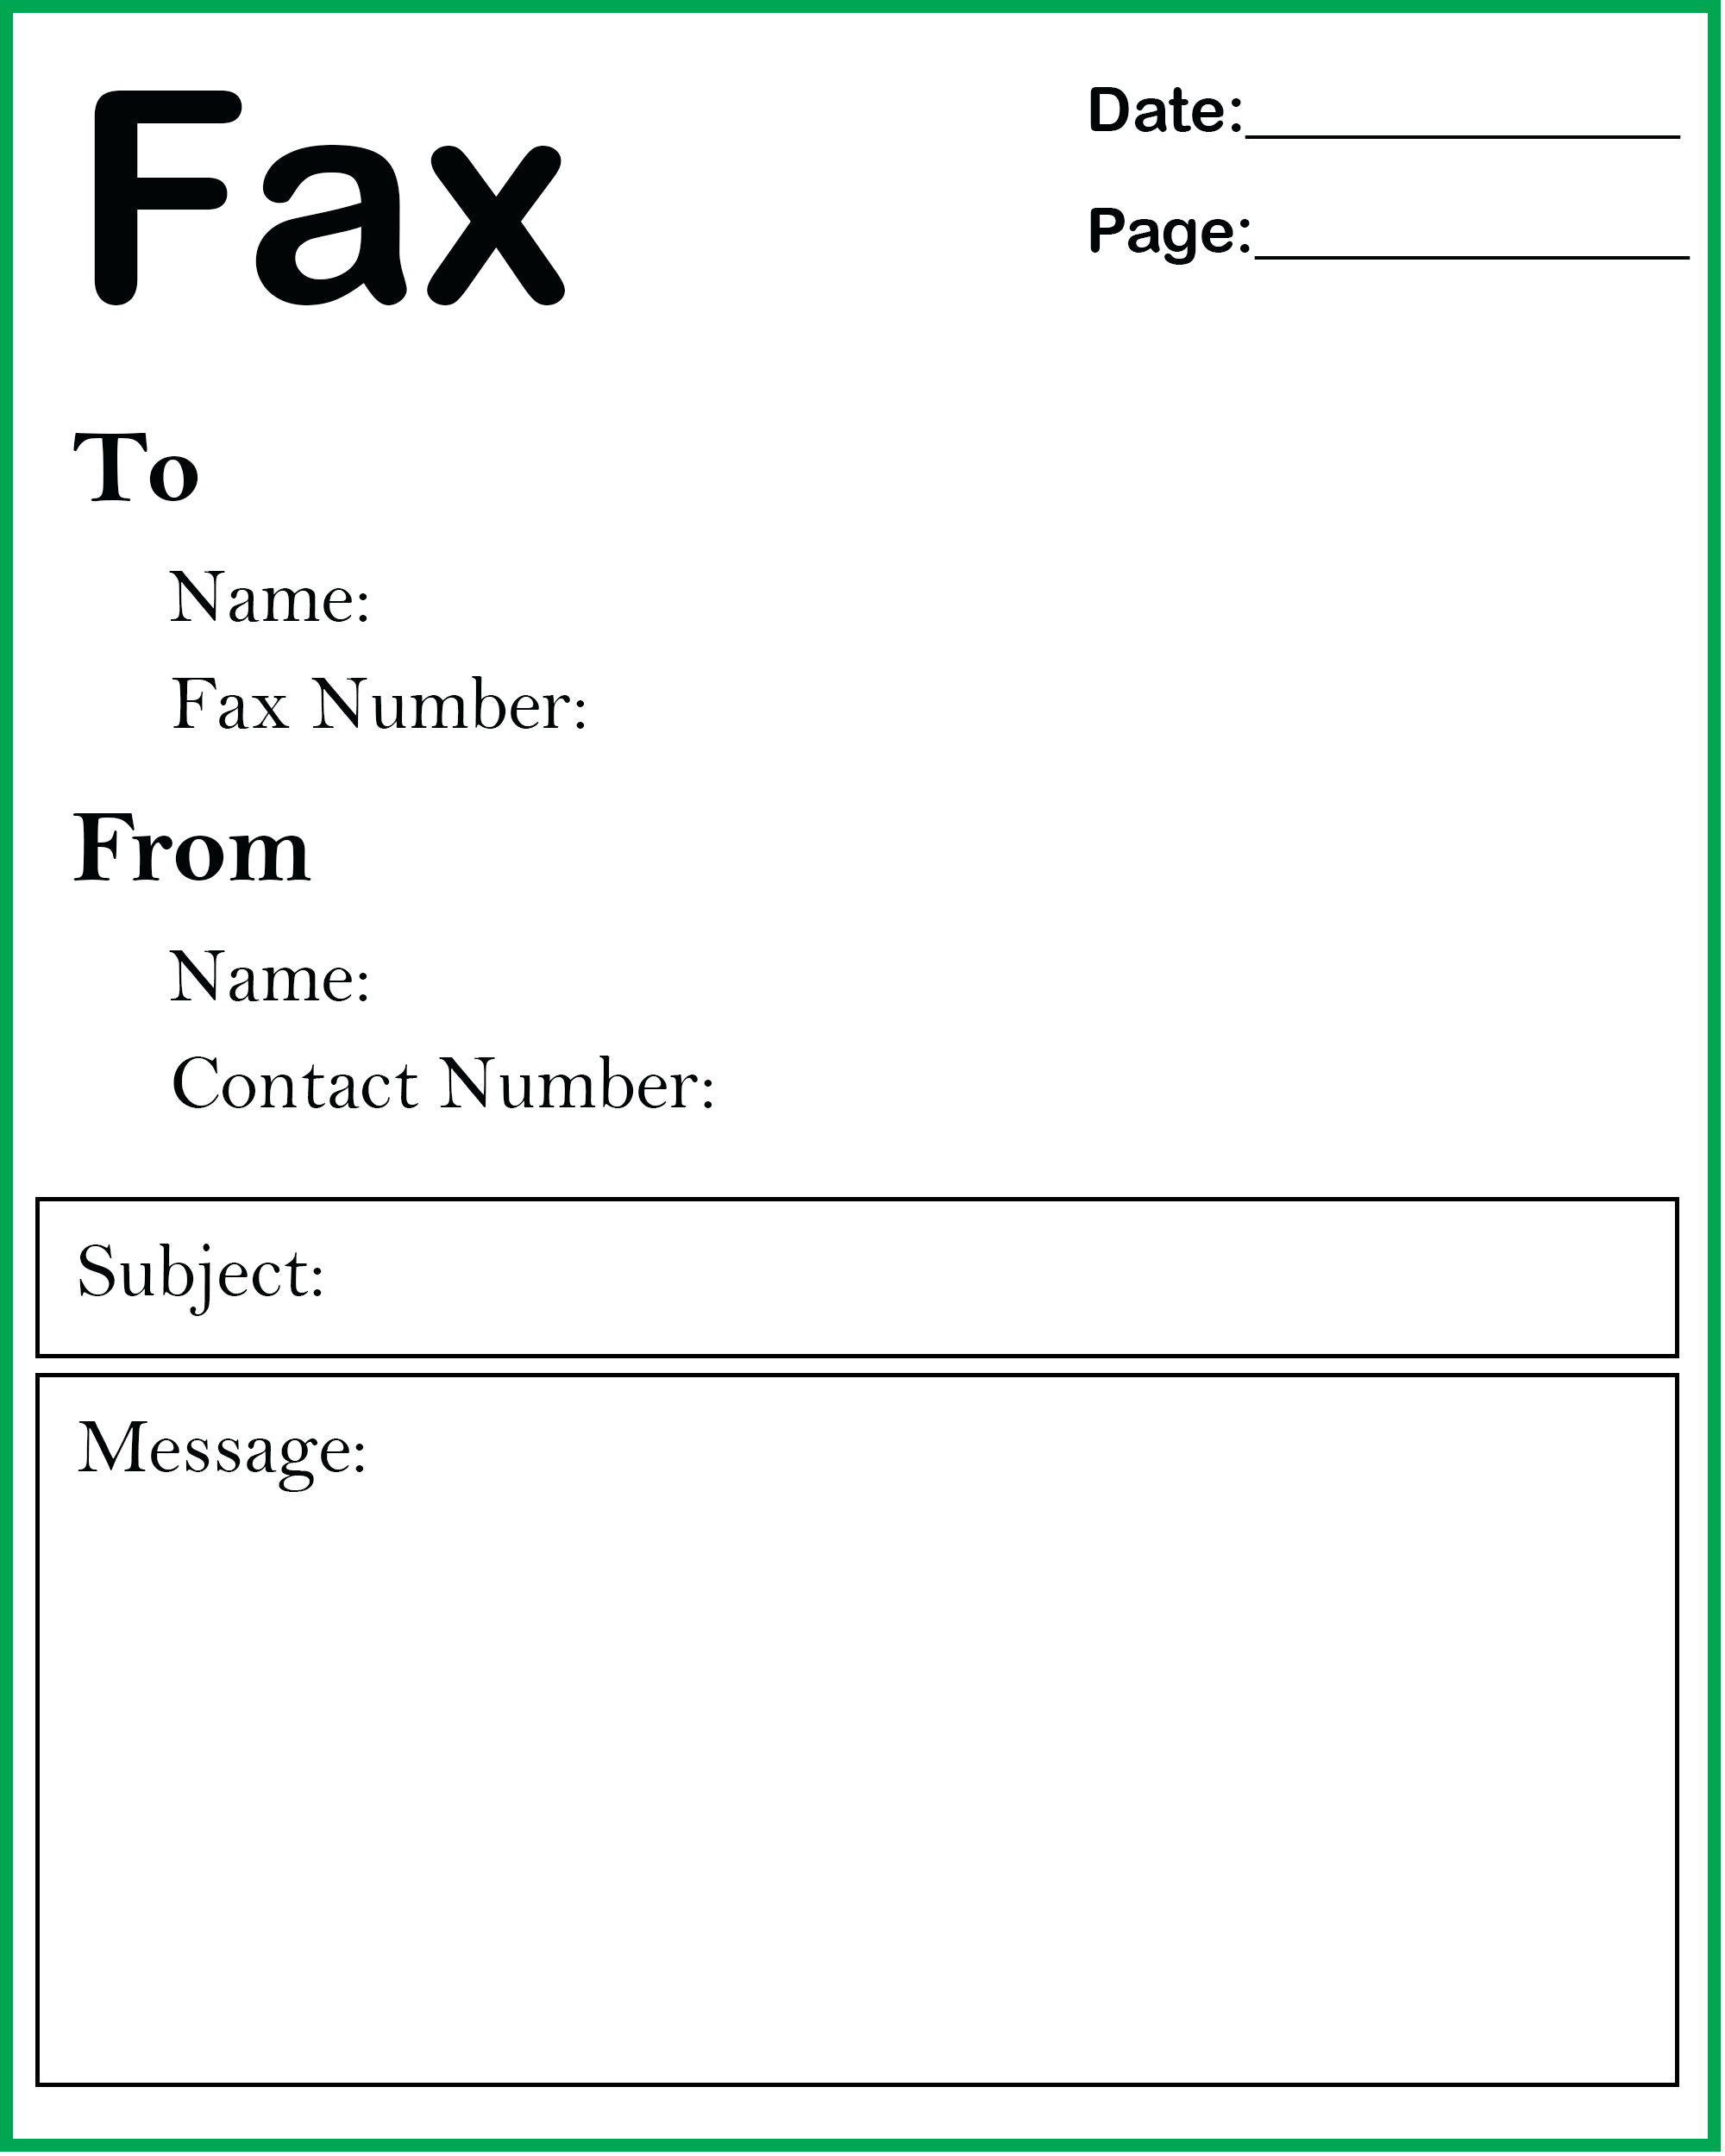 fax cover sheet necessary